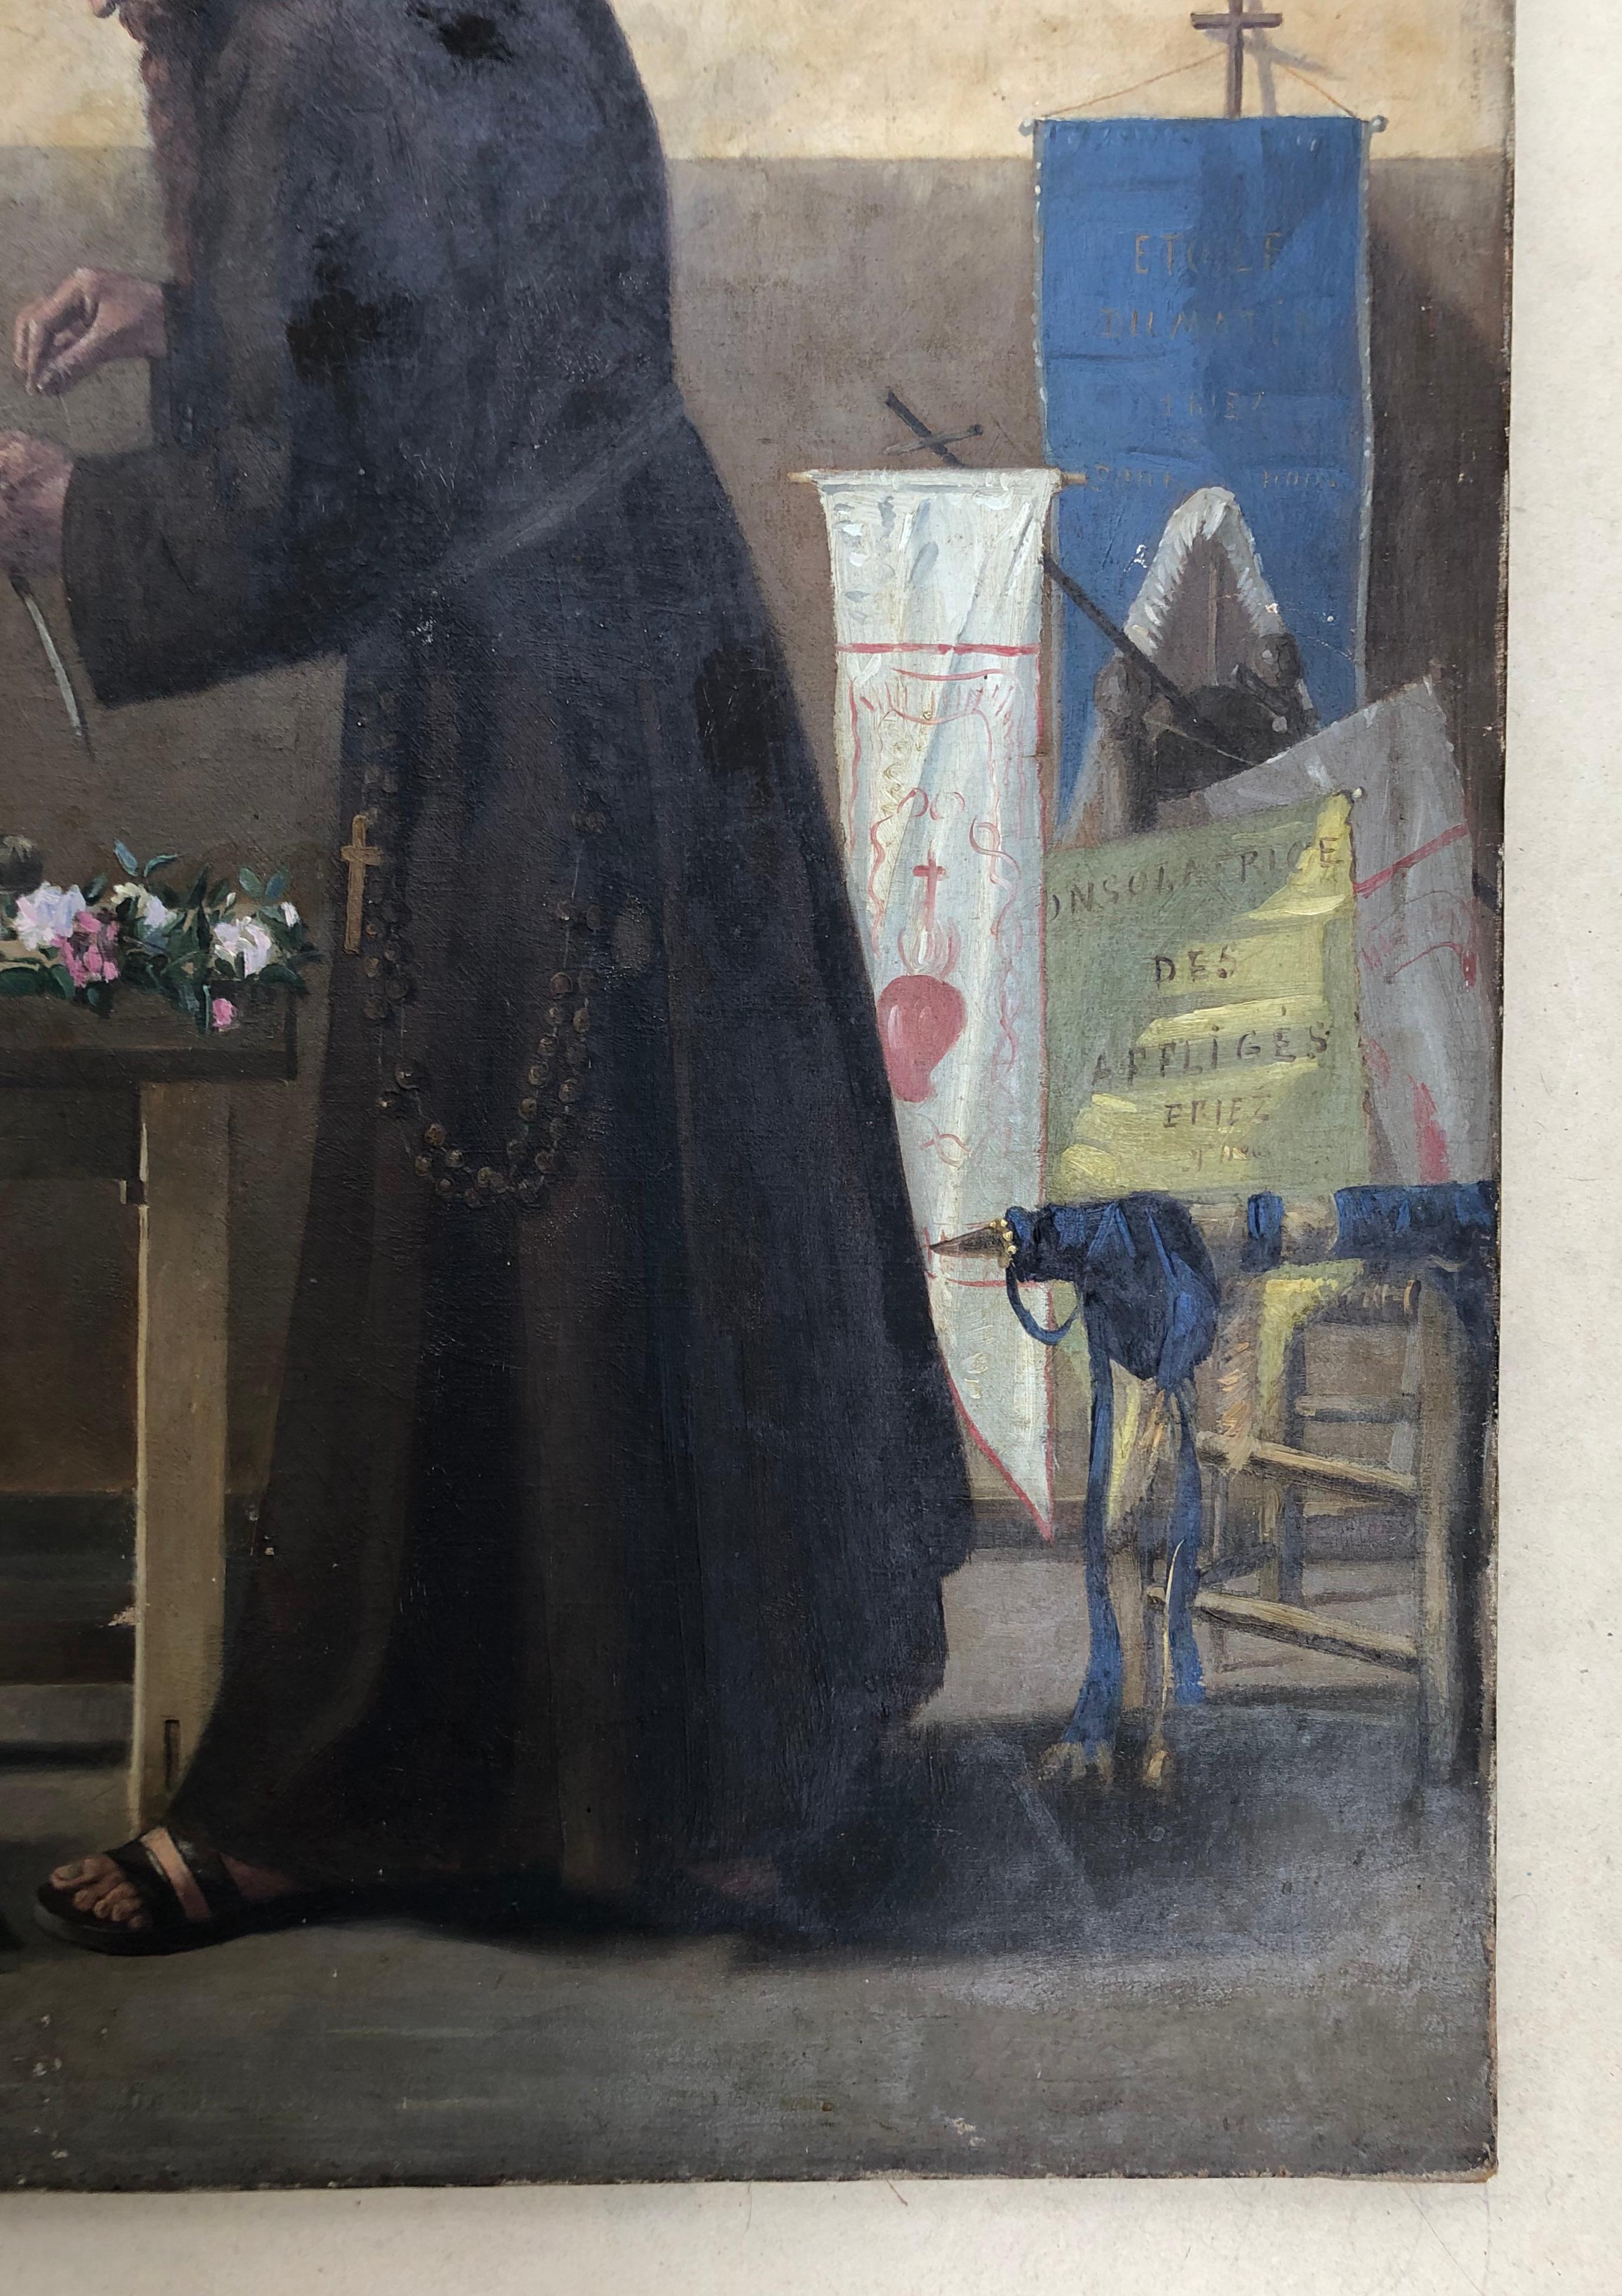 Monk preparing the festival of the rosary.
Oil on canvas 19th century.
Very small paint losses at the bottom.
A very small restoration downstairs.
Good general condition.
81 x 65 cm